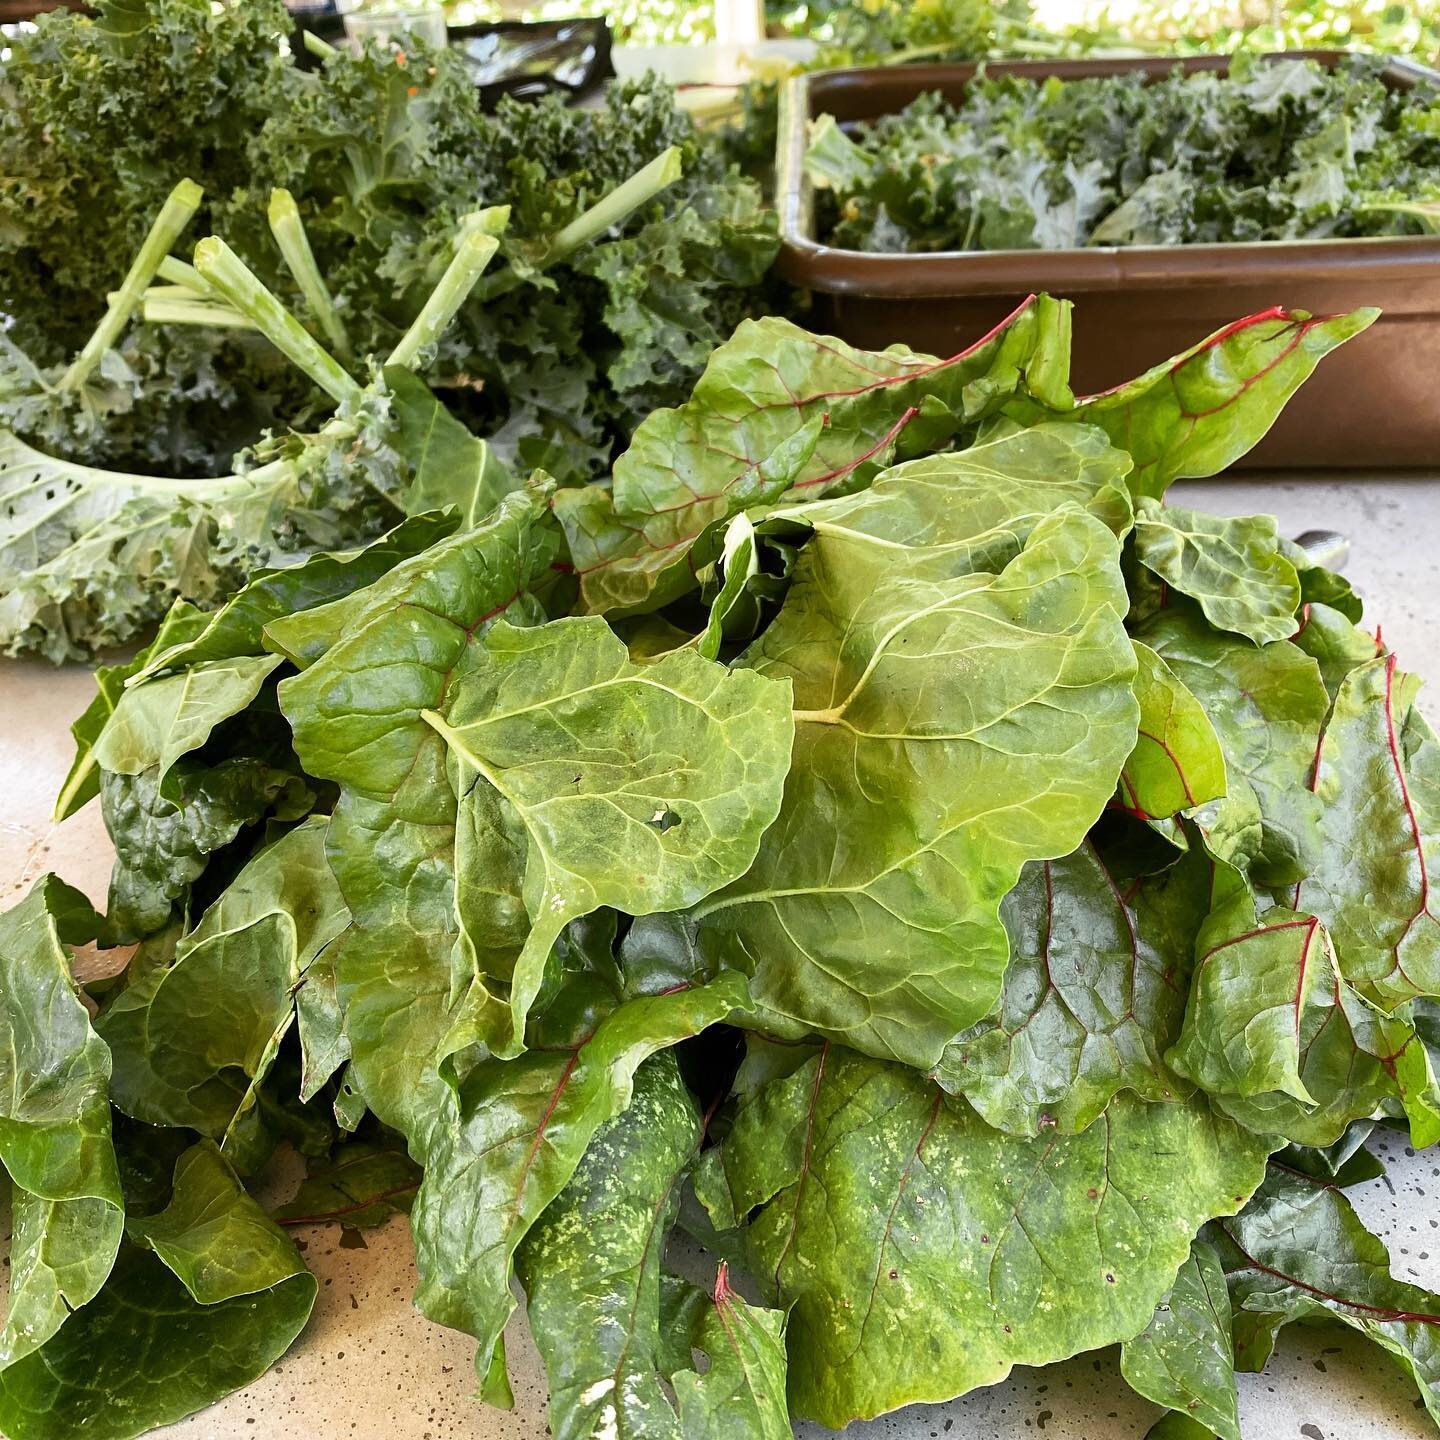 I shouldn&rsquo;t have a problem hitting my nutrition goals over the next several weeks after spending all day pulling, washing, and removing stems on my kale, chard, and beet greens. I have more bags of greens than I know what to do with. #kalechips